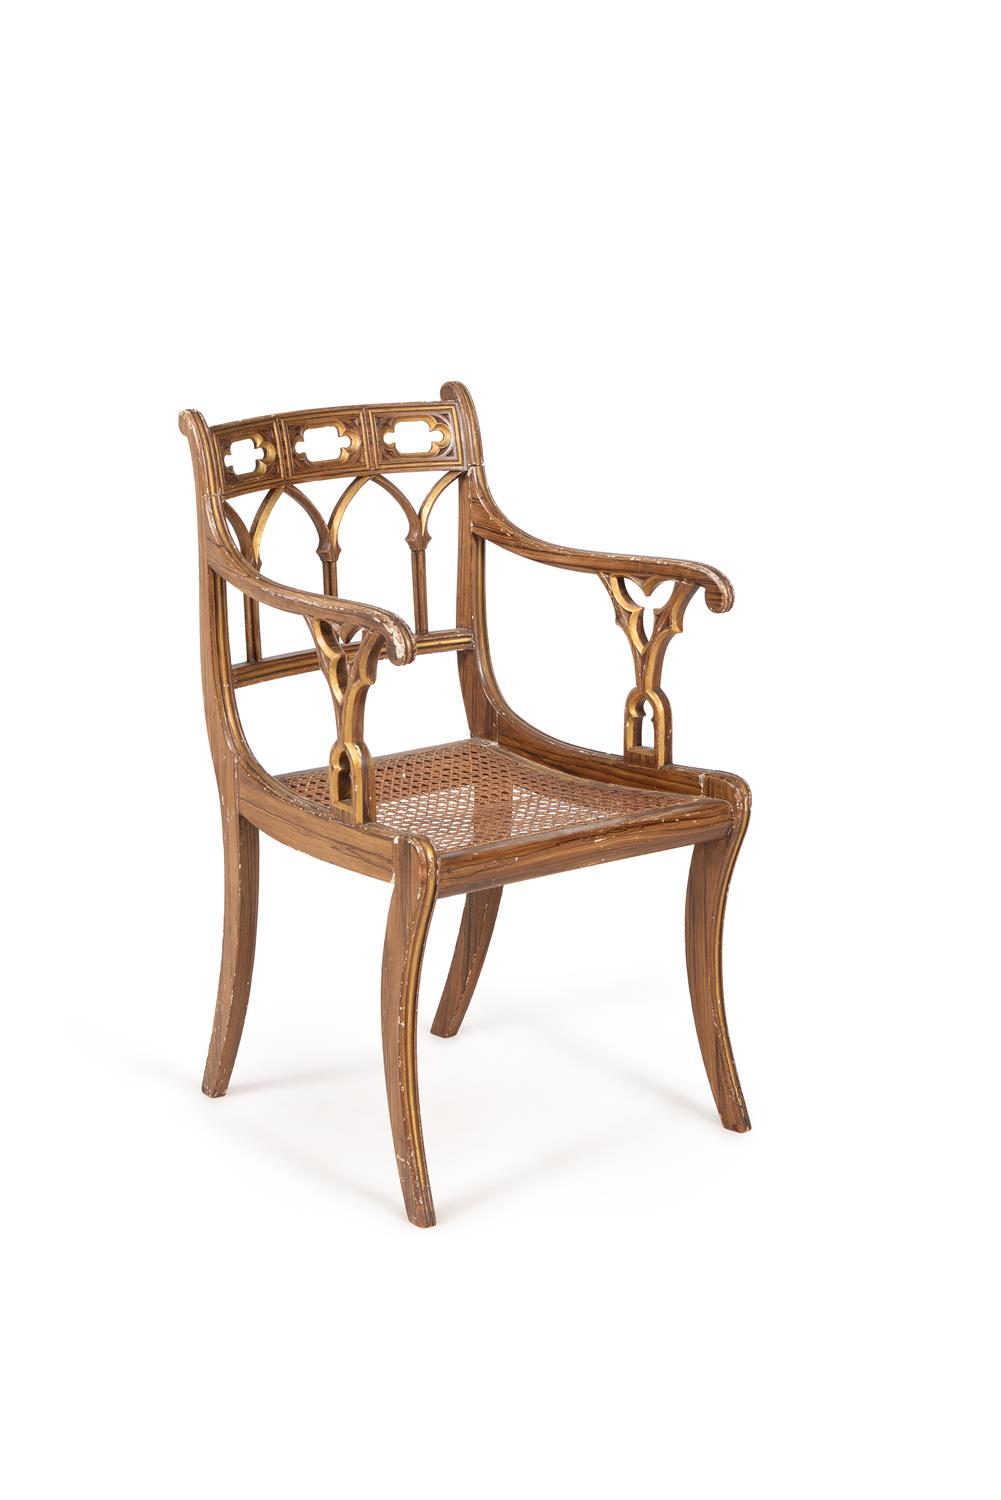 A Regency gothic revival simulated rosewood and parcel gilt armchair - Image 2 of 3